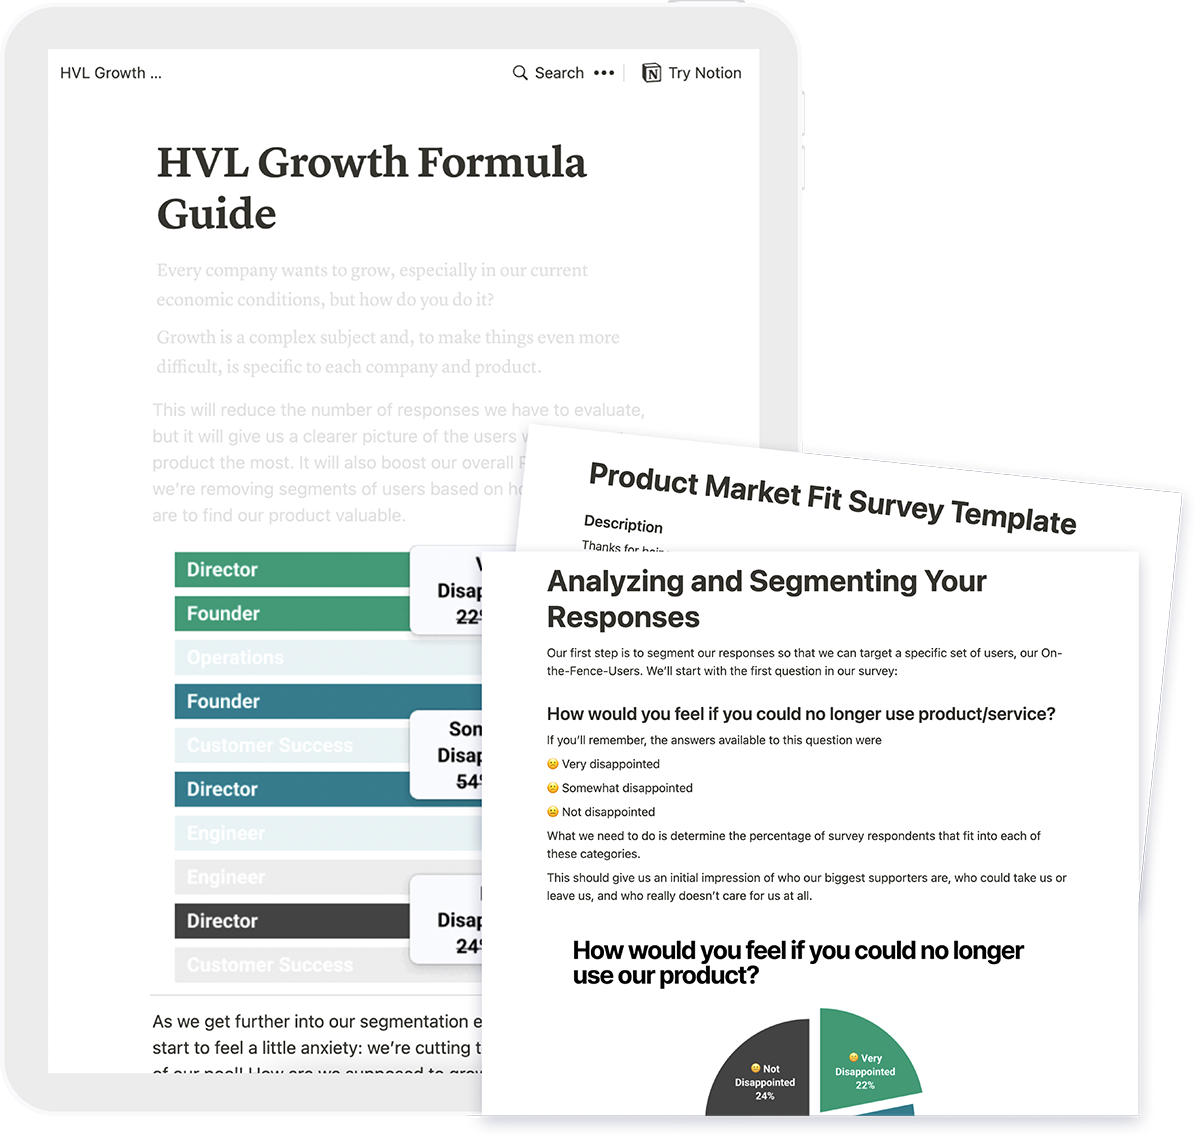 Growth Formula Guide Preview on iPad